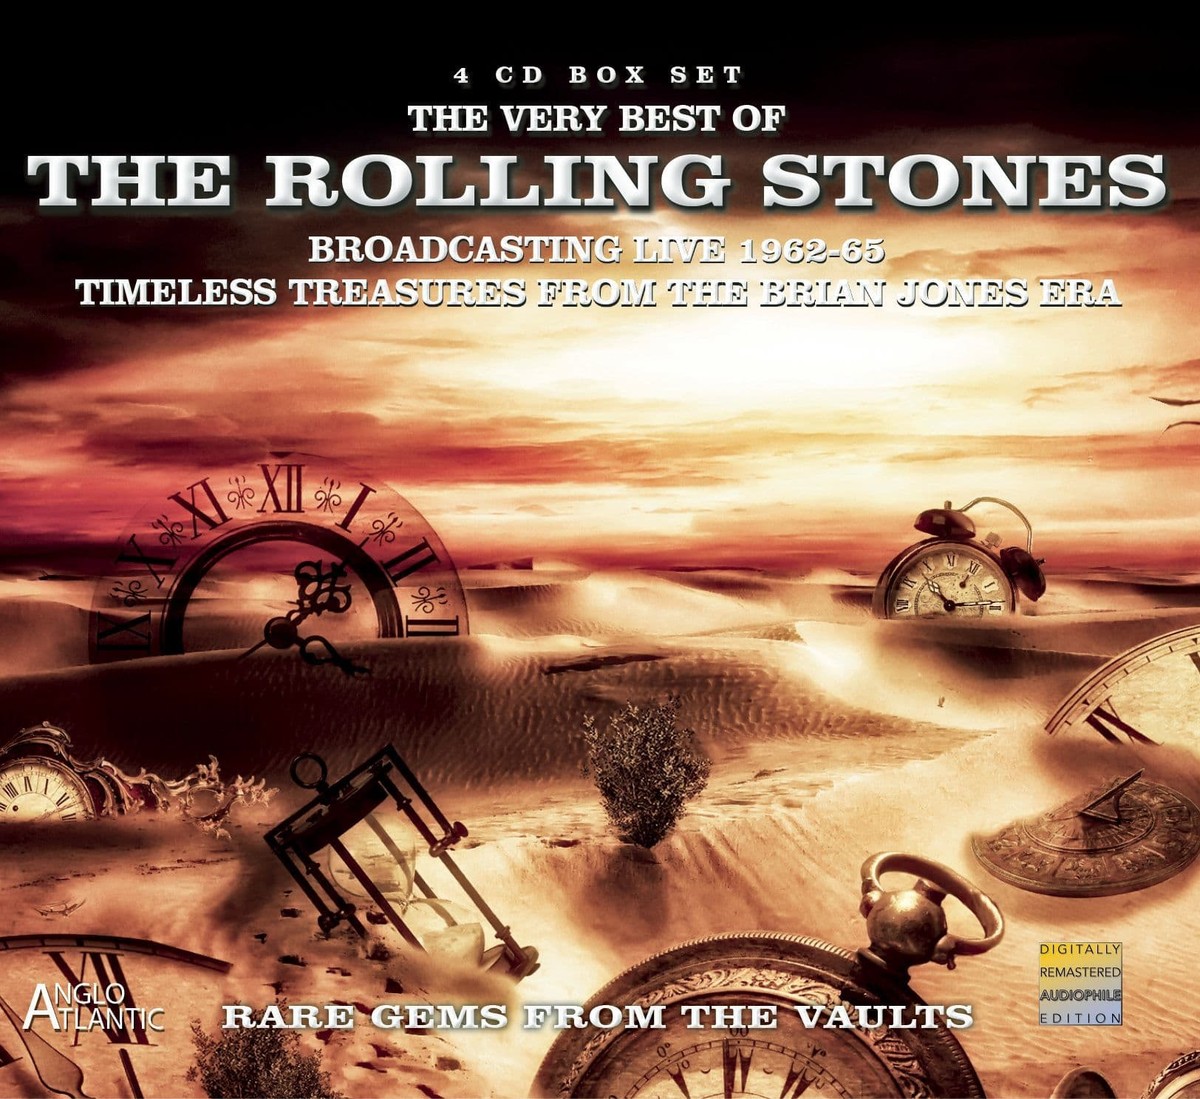 The Rolling Stones - The Very Best Of Rolling Stones Broadcasting Live